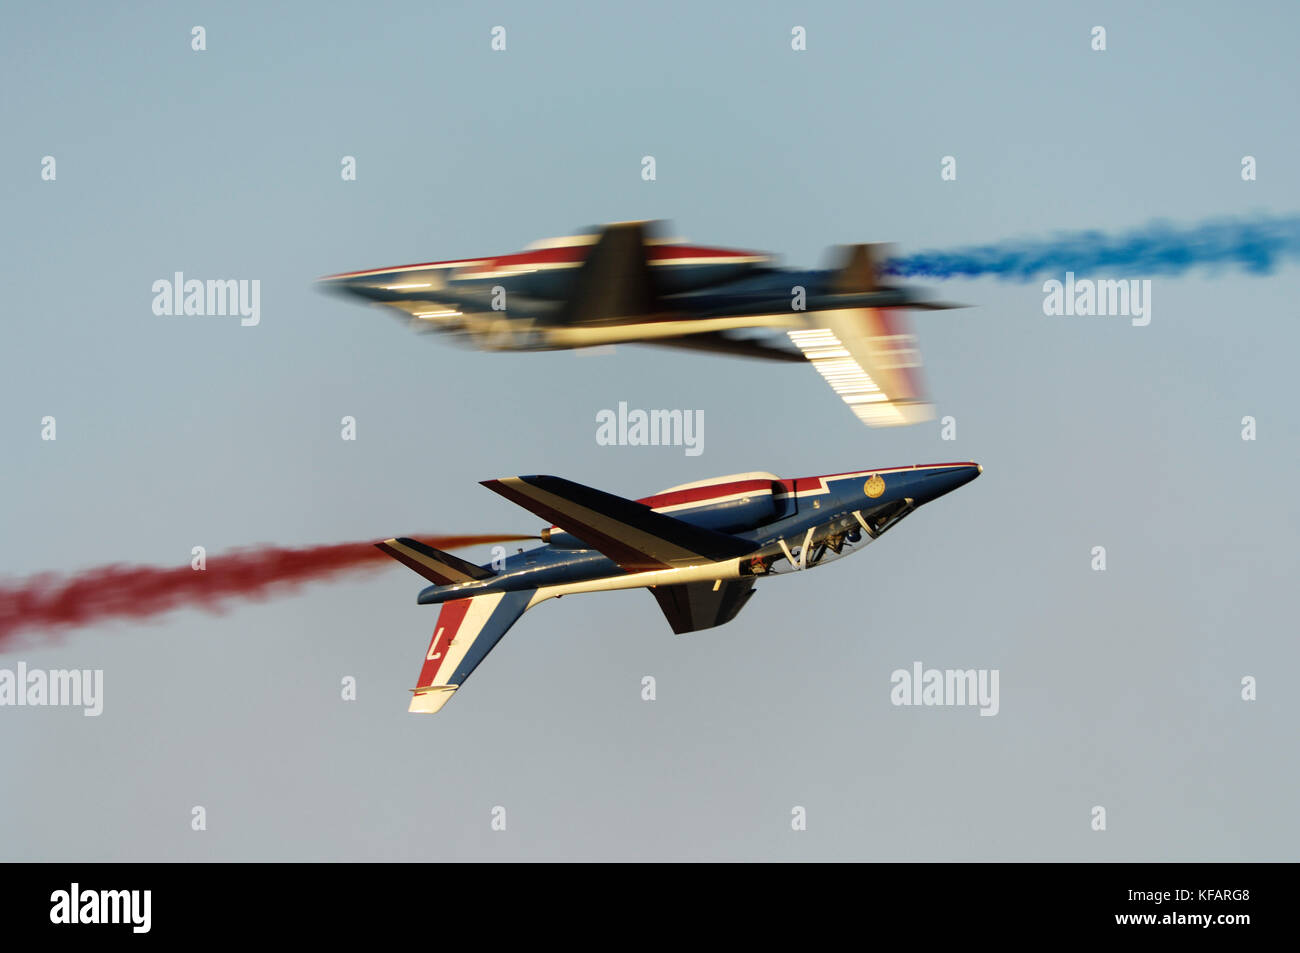 France - Air Force Patrouille de France Armee de l'Air Dassault Breguet Dornier Alpha Jets flying in formation with smoke at the Dubai AirShow 2007 Stock Photo